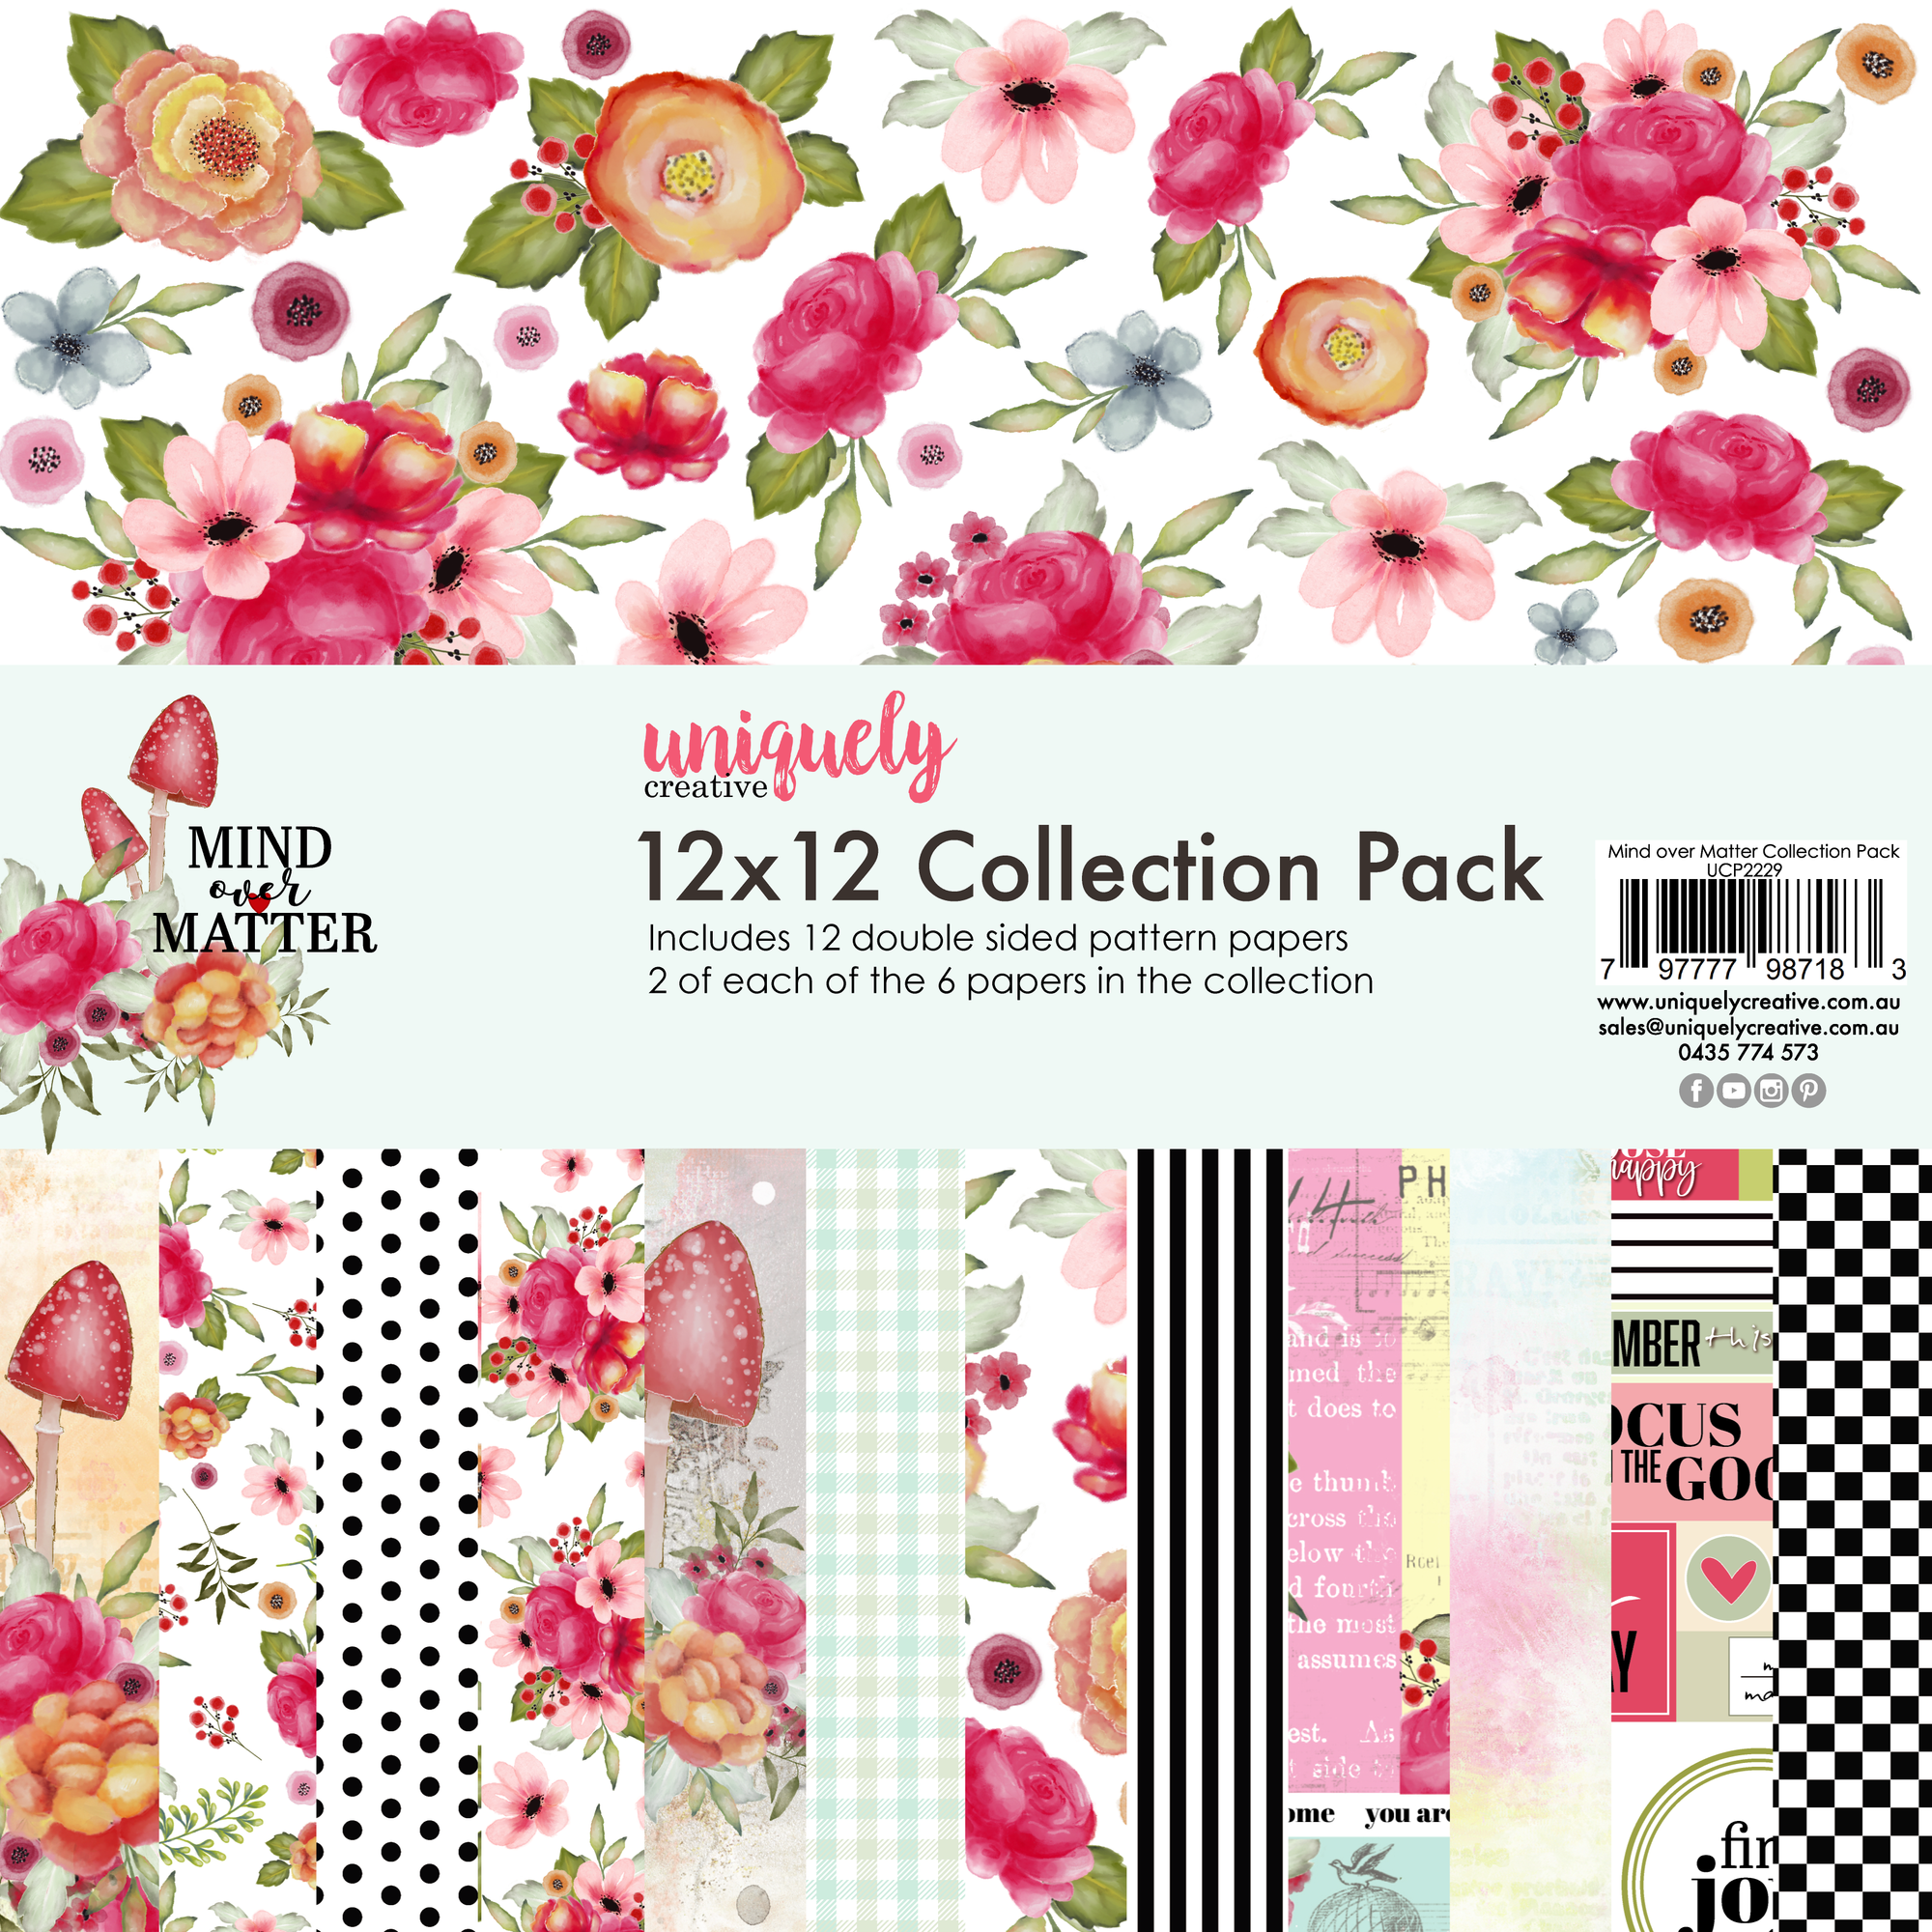 Uniquely Creative - Mind Over Matter 12x12 Collection Pack